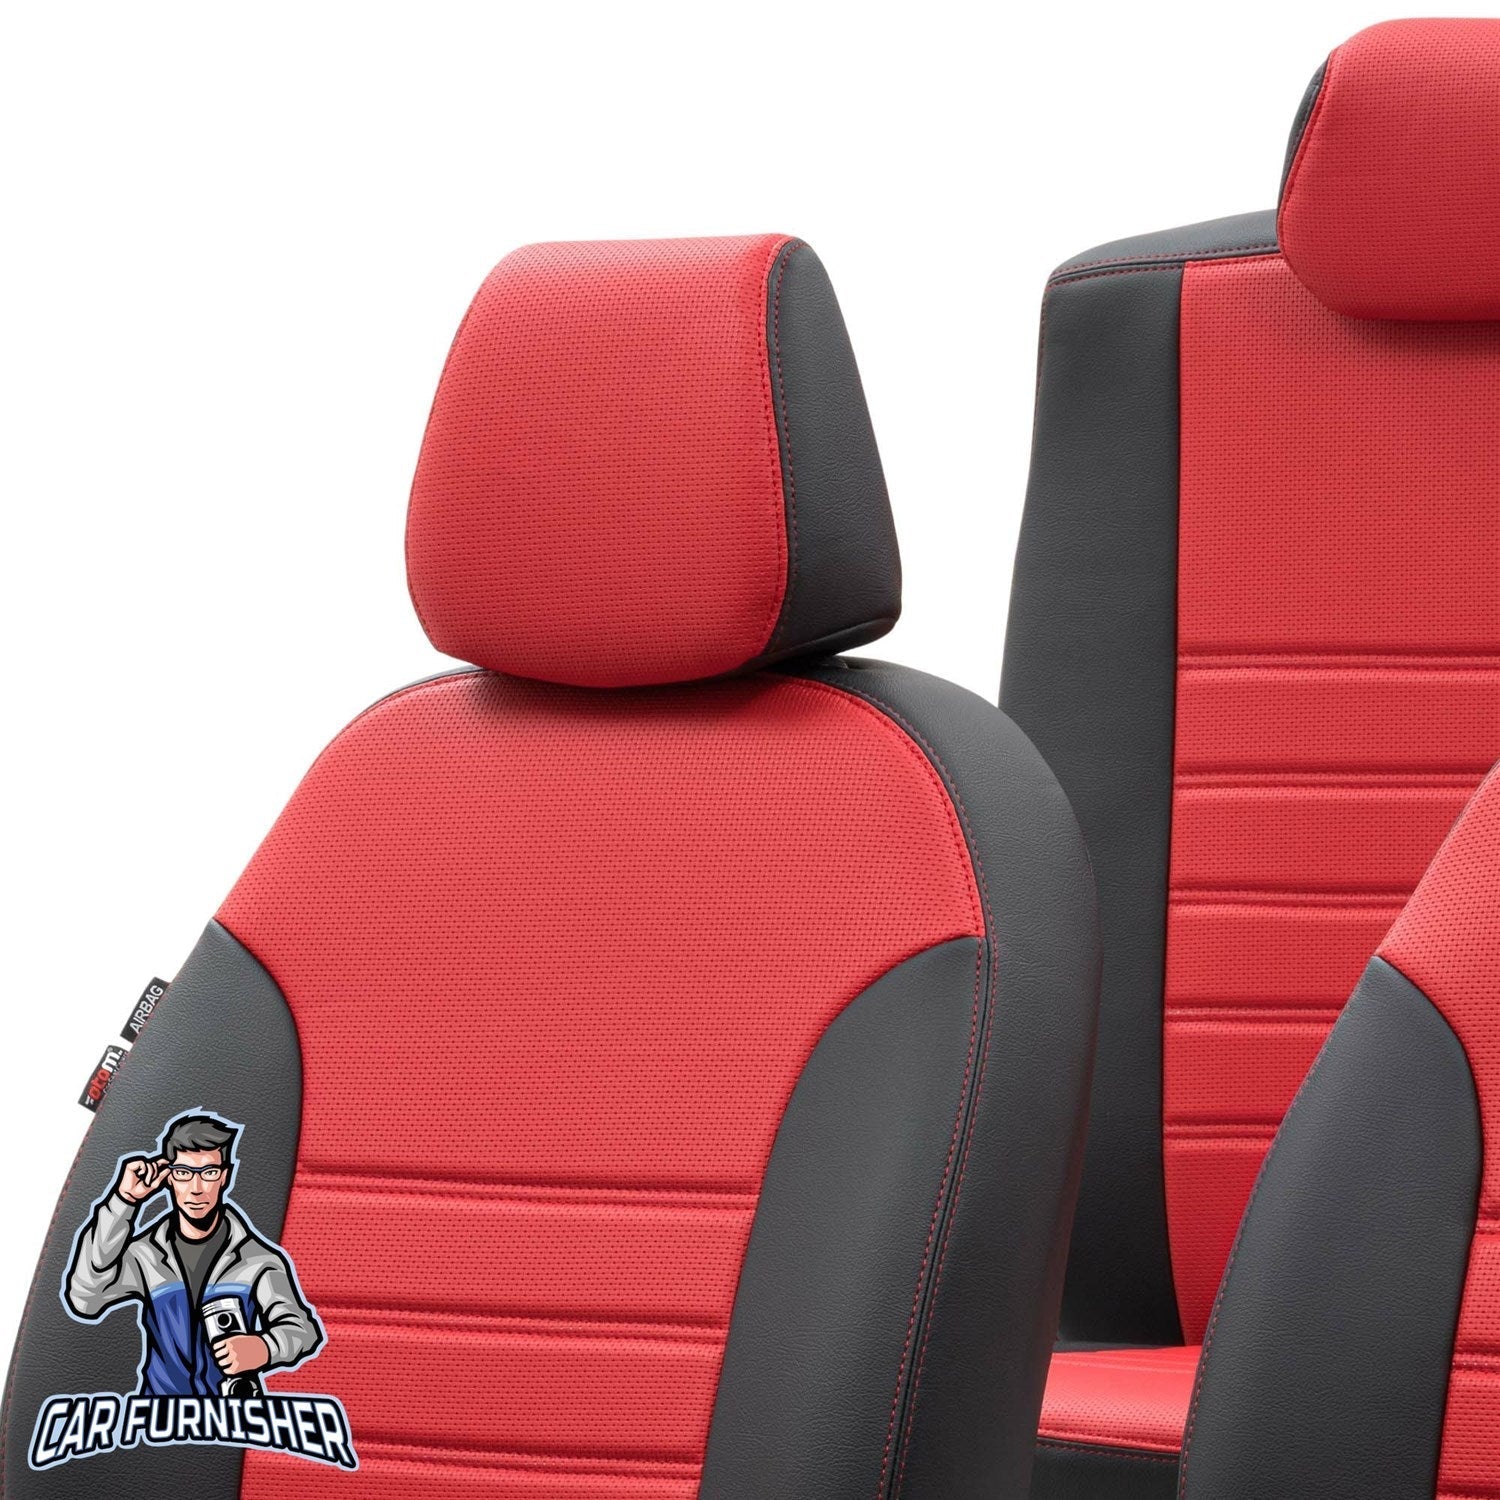 Opel Vectra Seat Covers New York Leather Design Red Leather